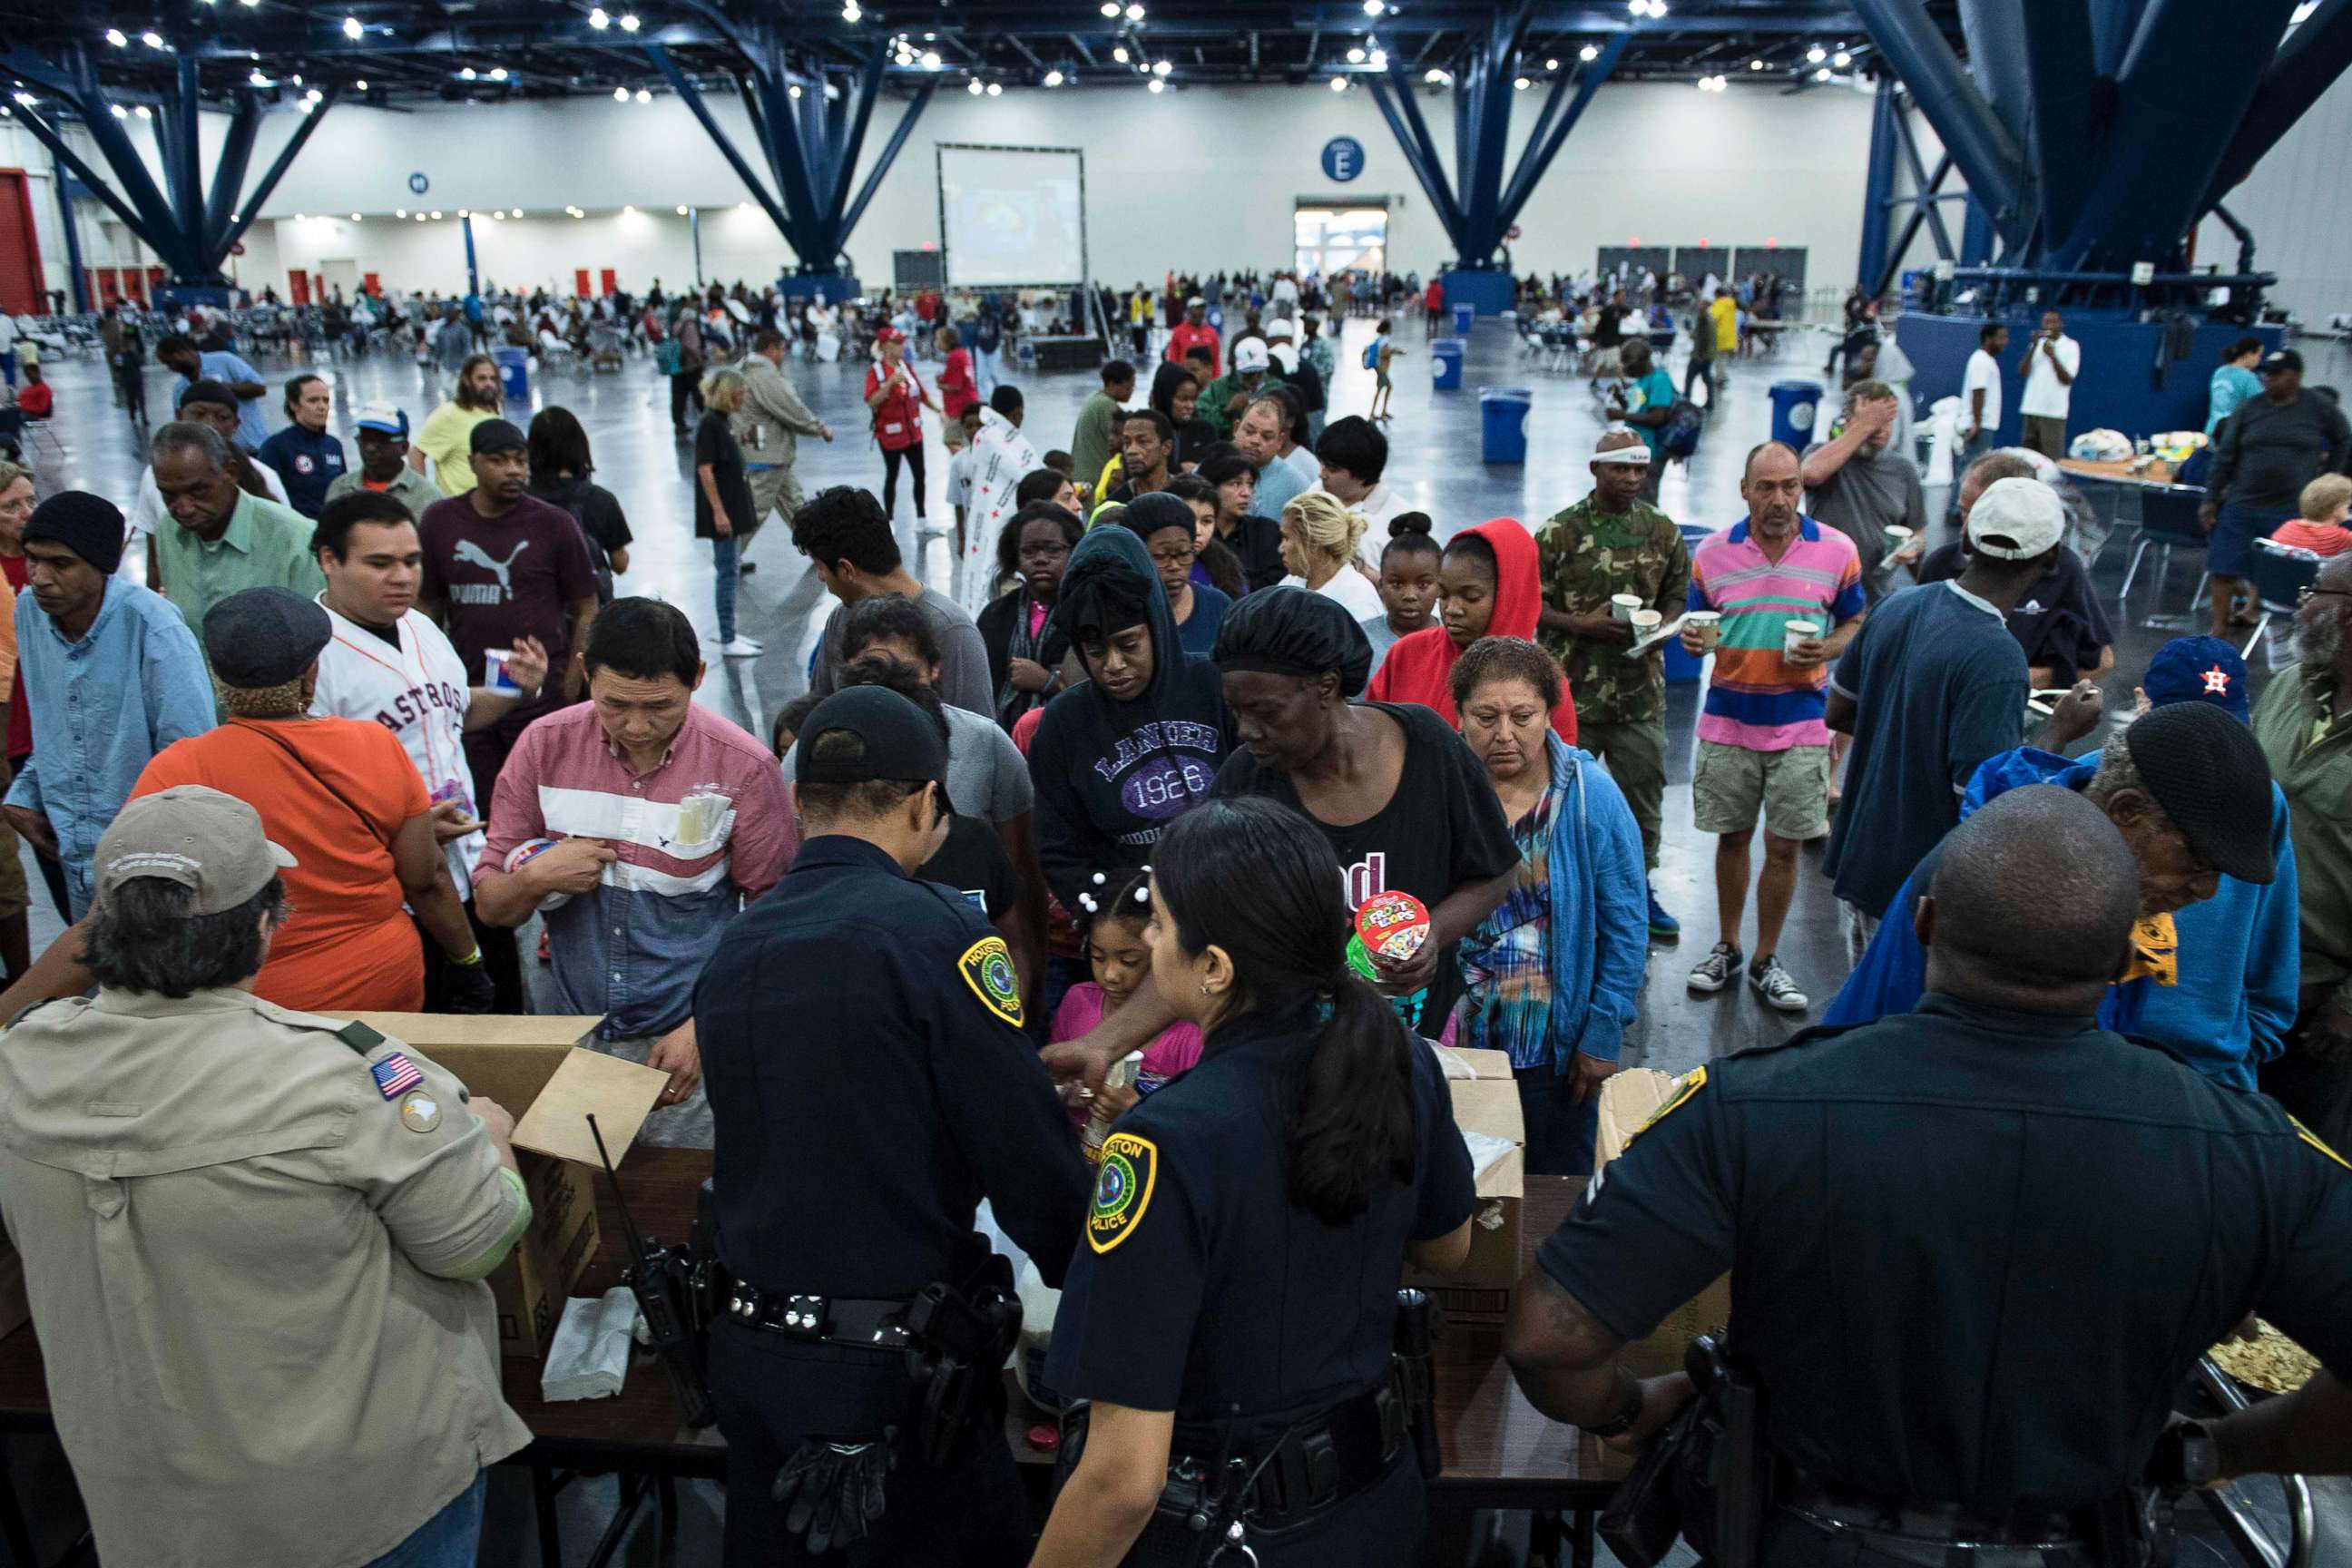 PHOTO: Flood victims gather for food at a shelter in the George R. Brown Convention Center during the aftermath of Hurricane Harvey, August 28, 2017, in Houston, Texas.